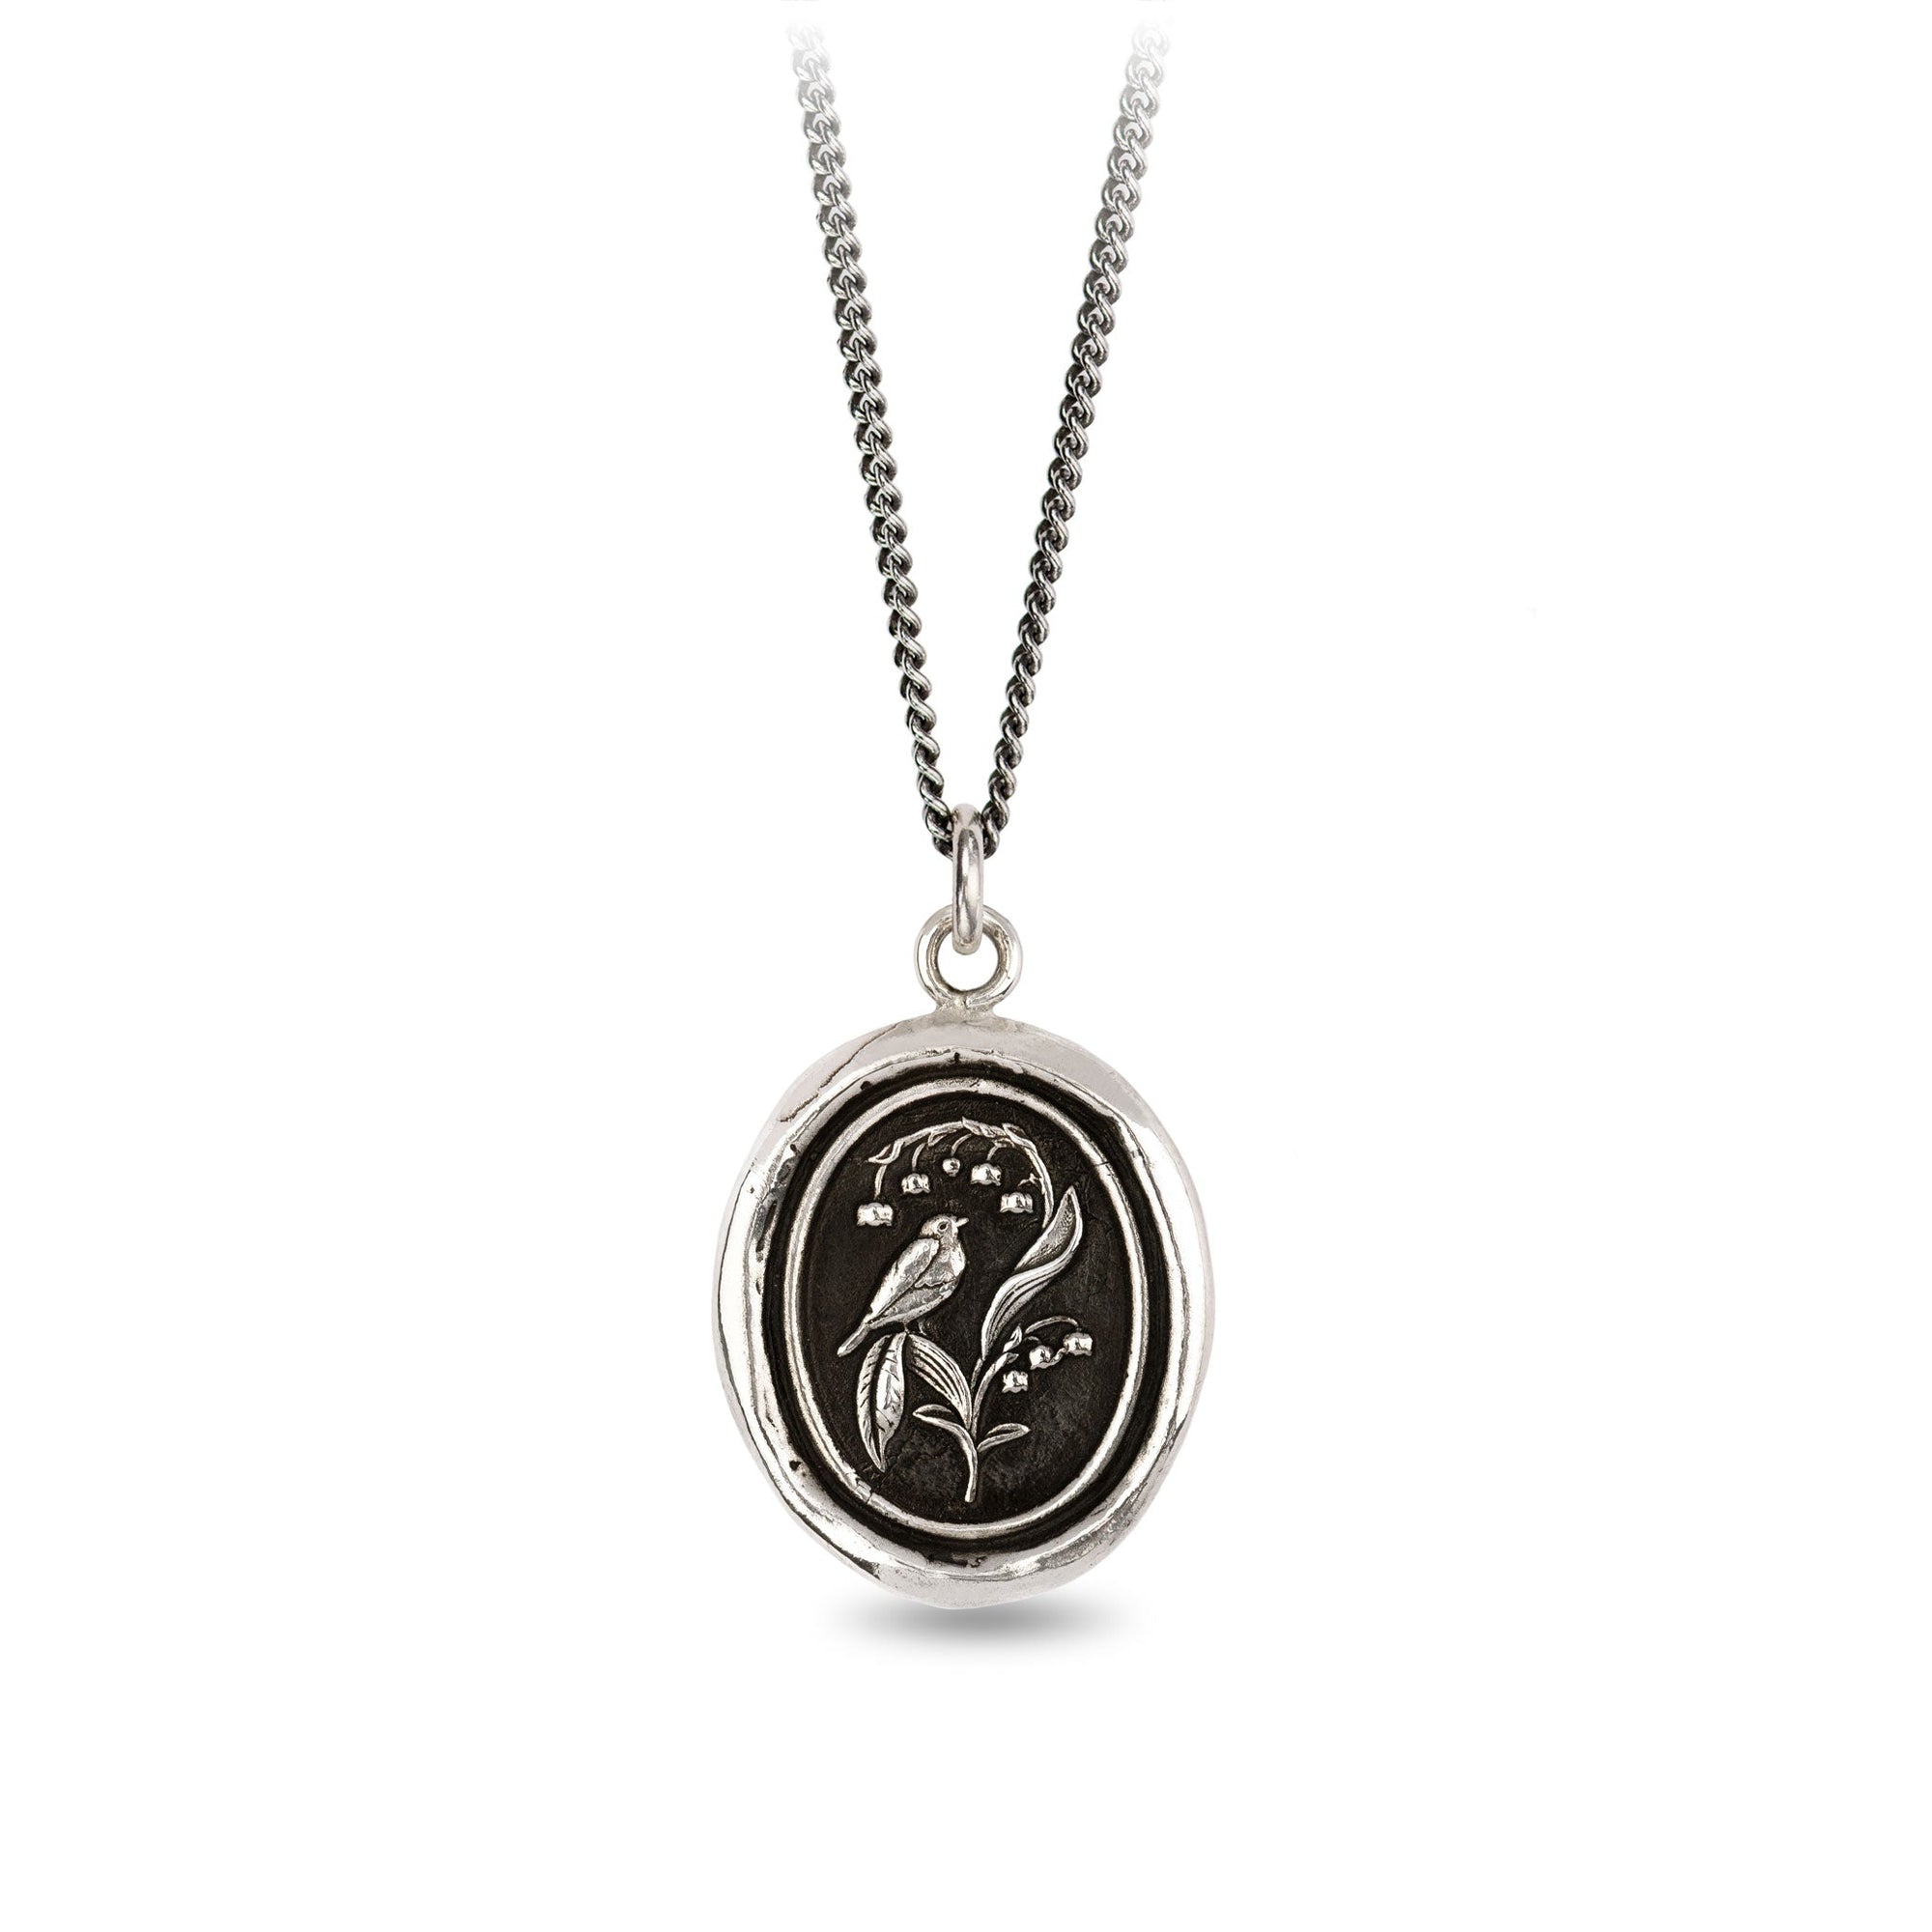 Return to Happiness Talisman Necklace